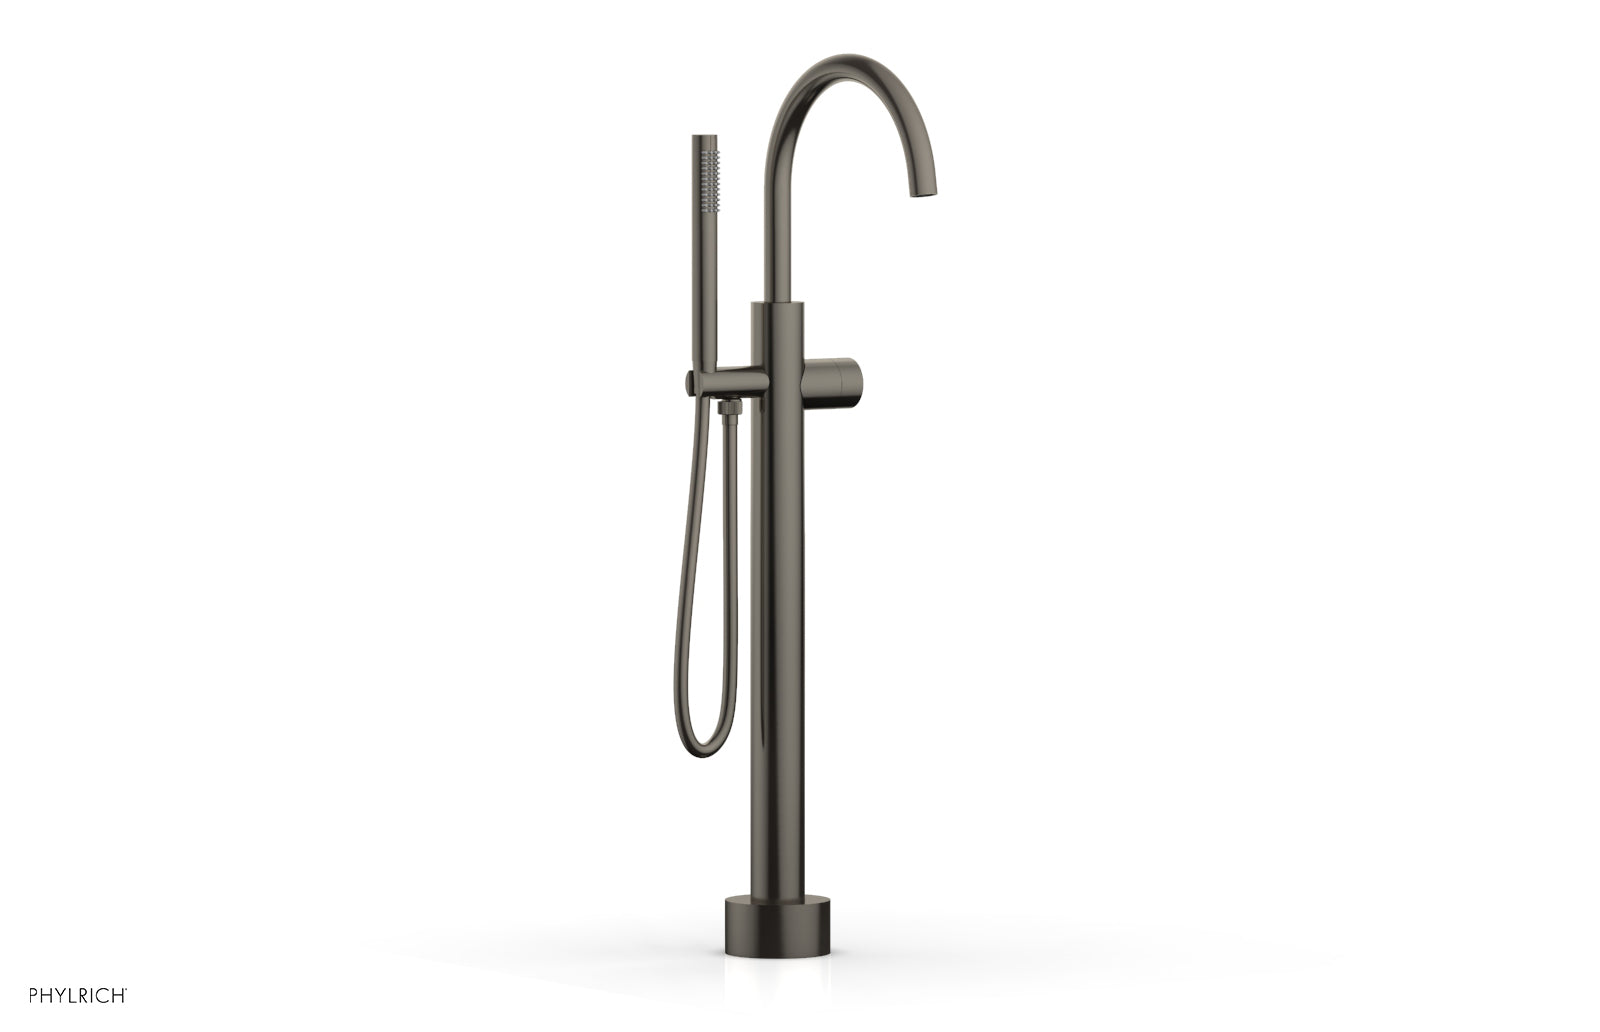 Phylrich BASIC II Low Floor Mount Tub Filler - Smooth Handle with Hand Shower